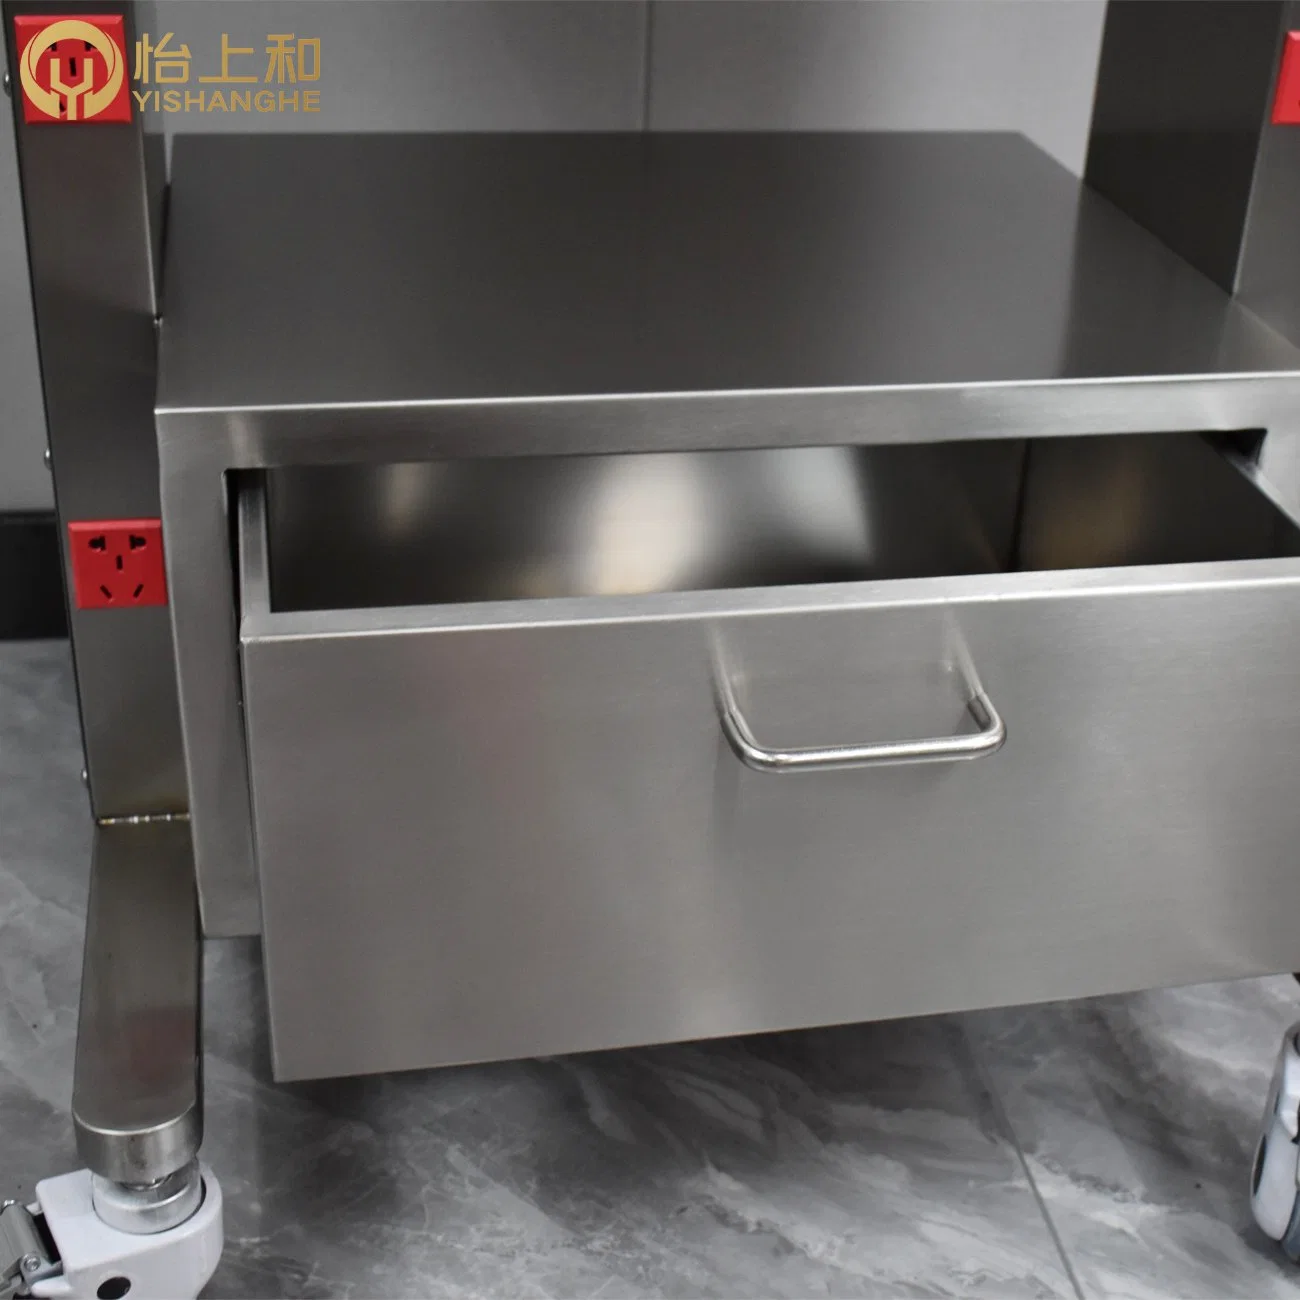 Veterinary Hospital Devices Stainless Steel Veterinary Equipment Medical Supply Products